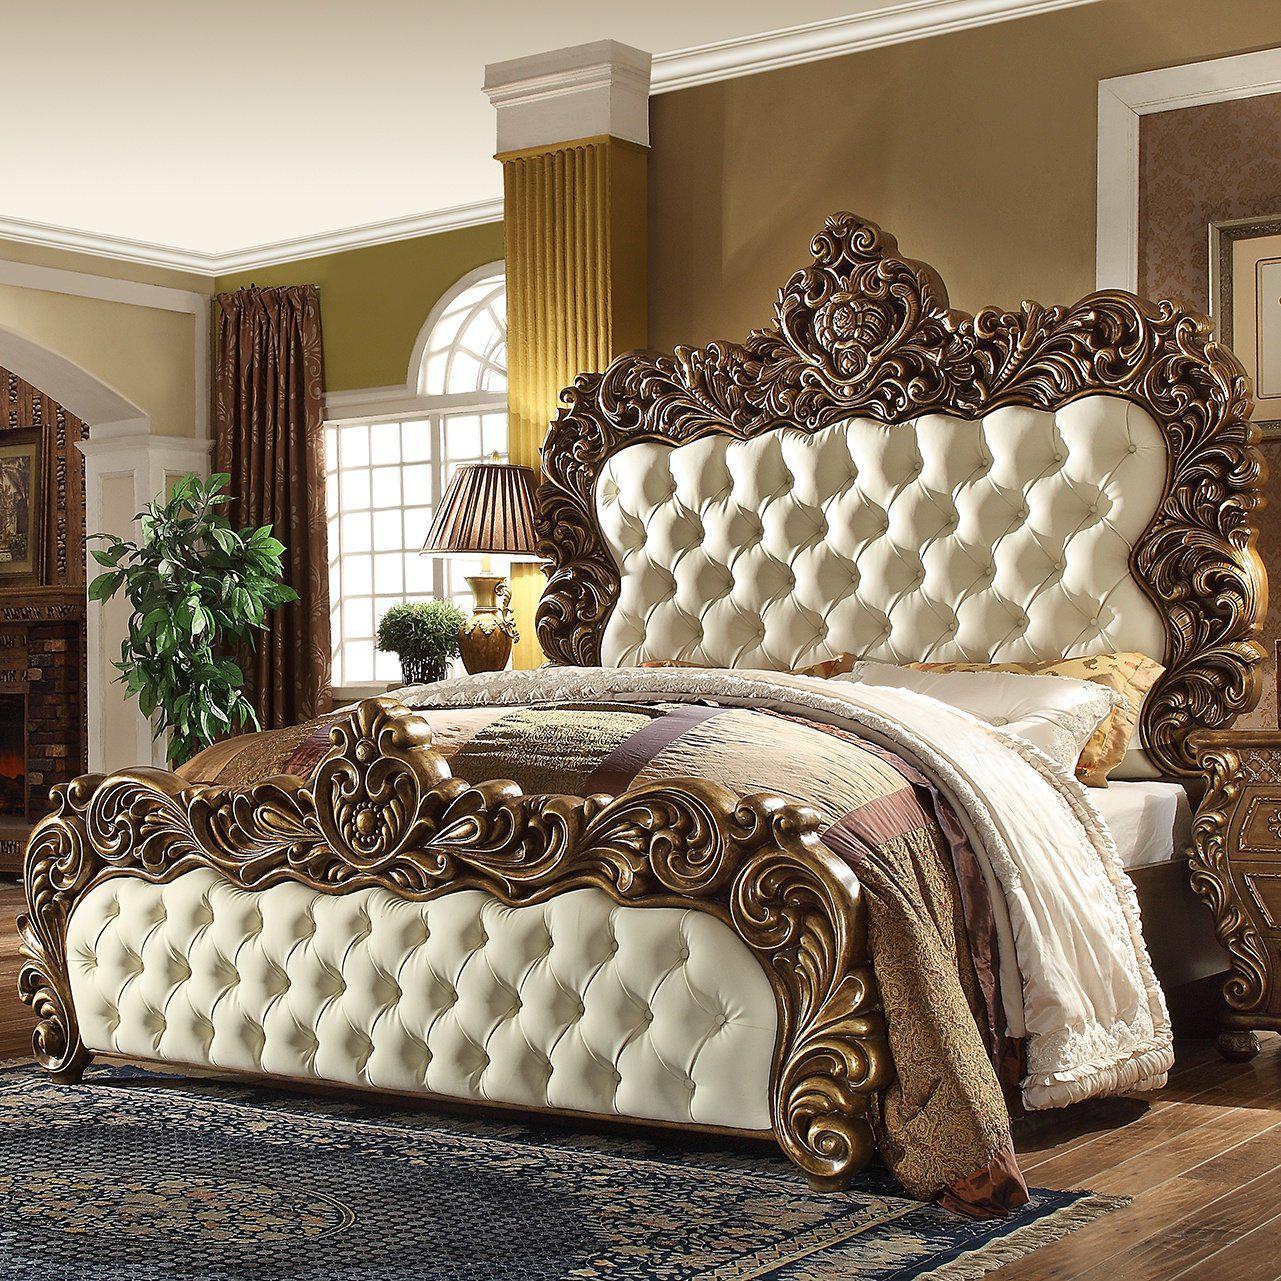 Homey Design Luxury Hd-8011 - Ck Bed-Iron Home Concepts